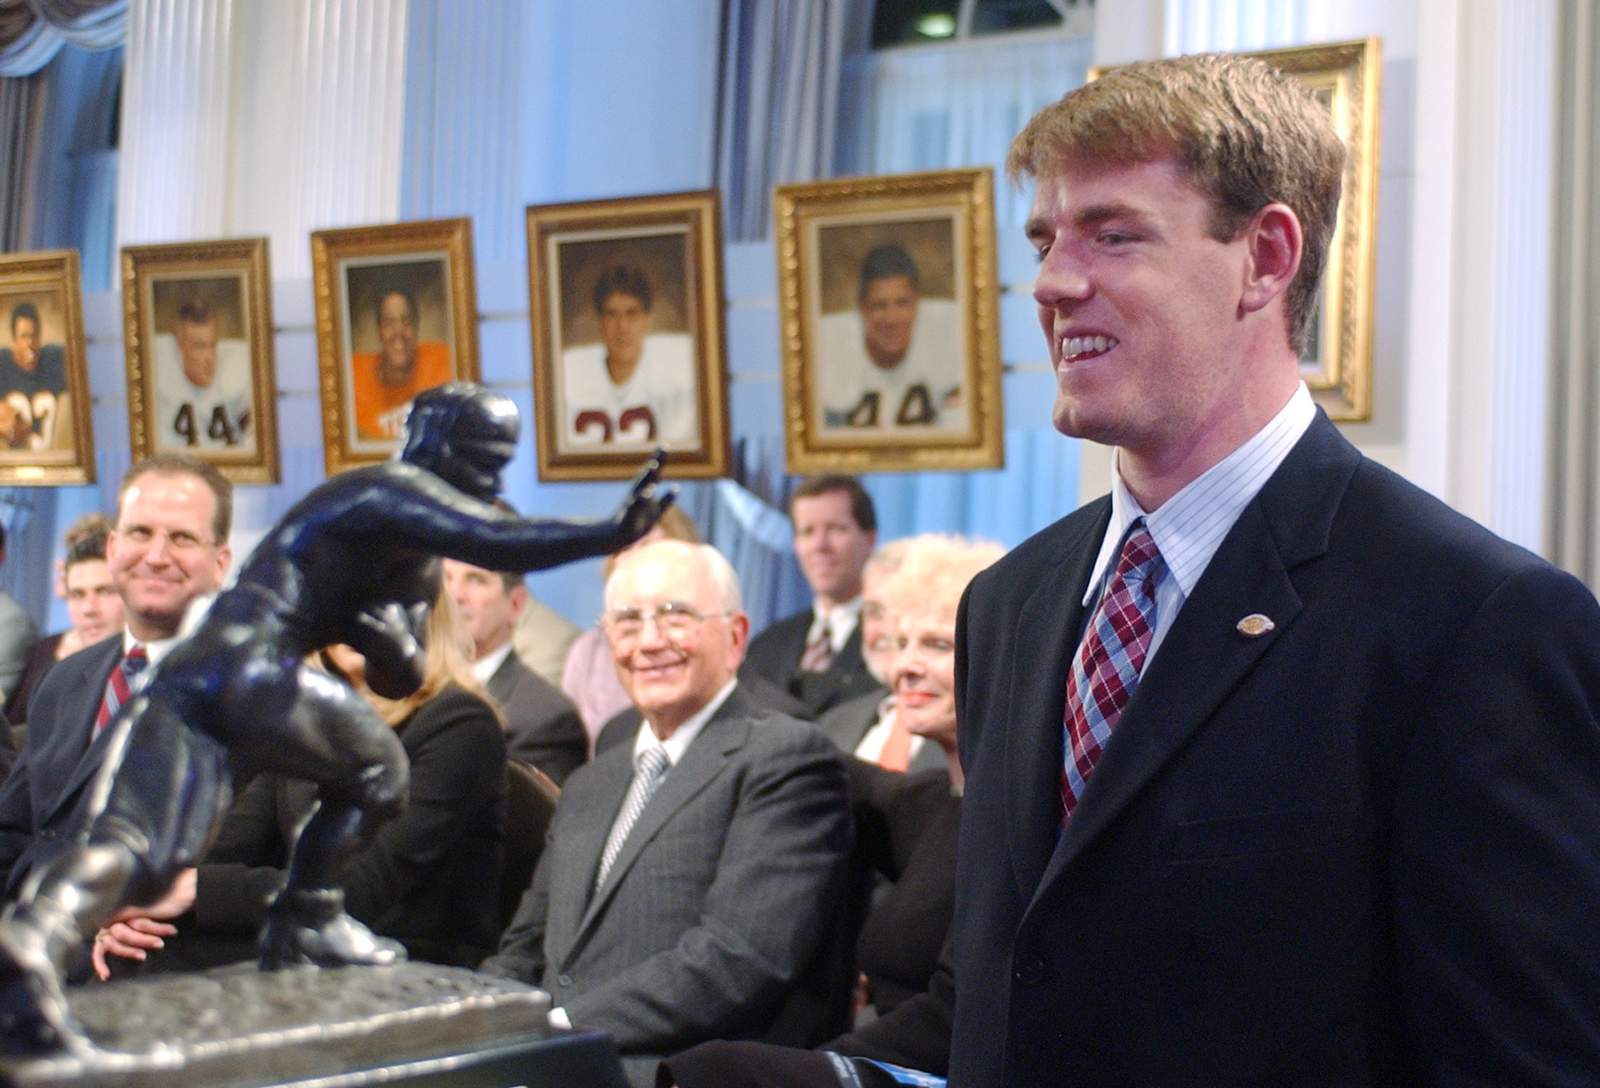 Carson Palmer, Bob Stoops lead college Hall of Fame class